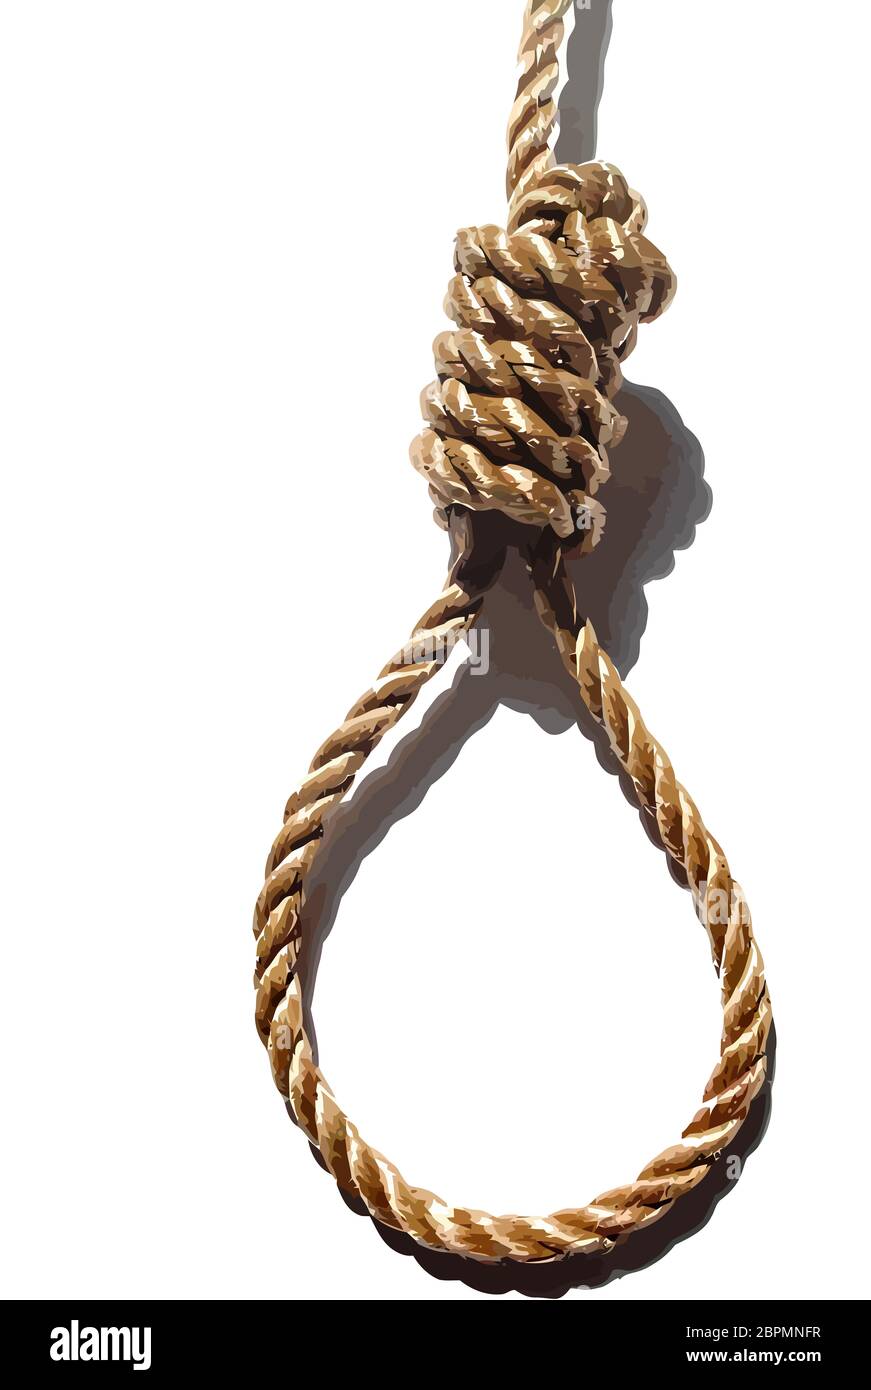 suicide hanging knot noose execution justice illustration Stock